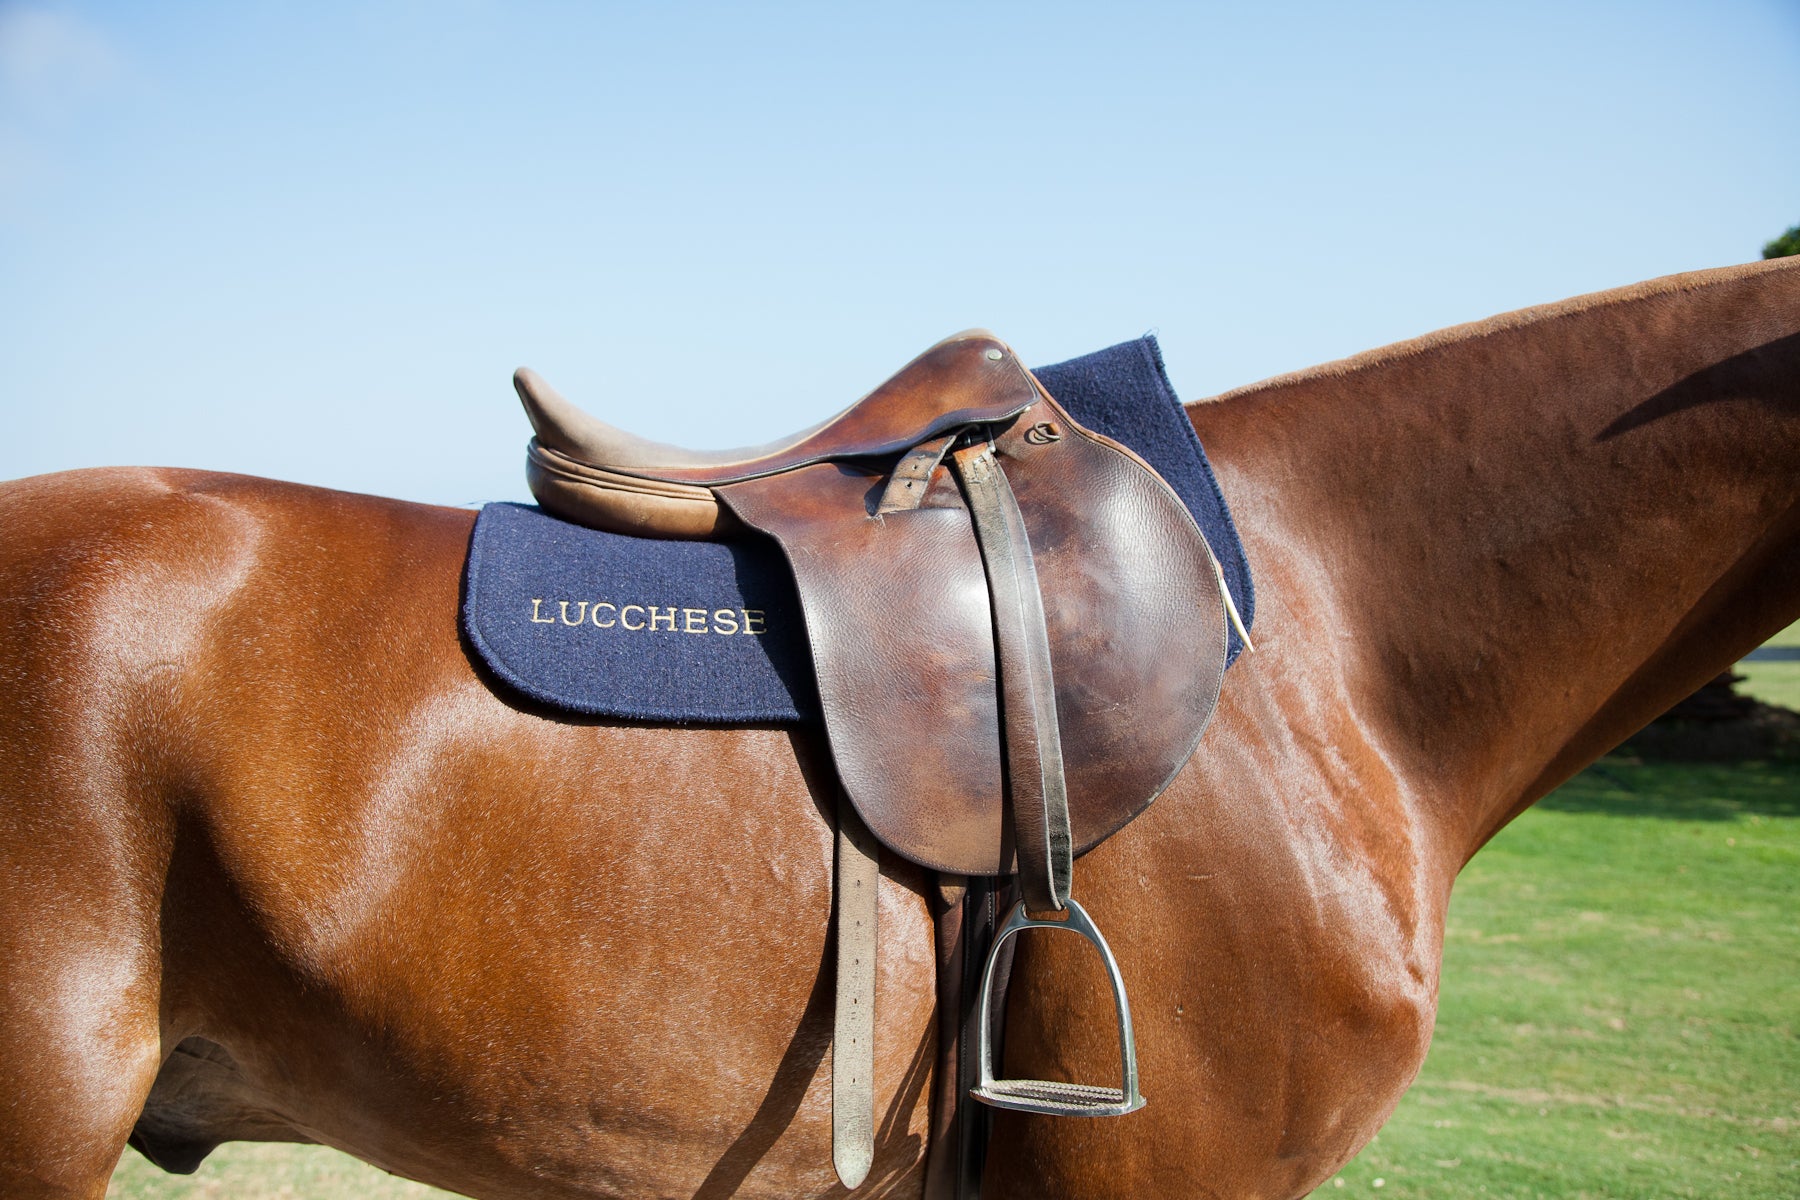 Lucchese Polo at the Gulfstream Pacific Coast Open